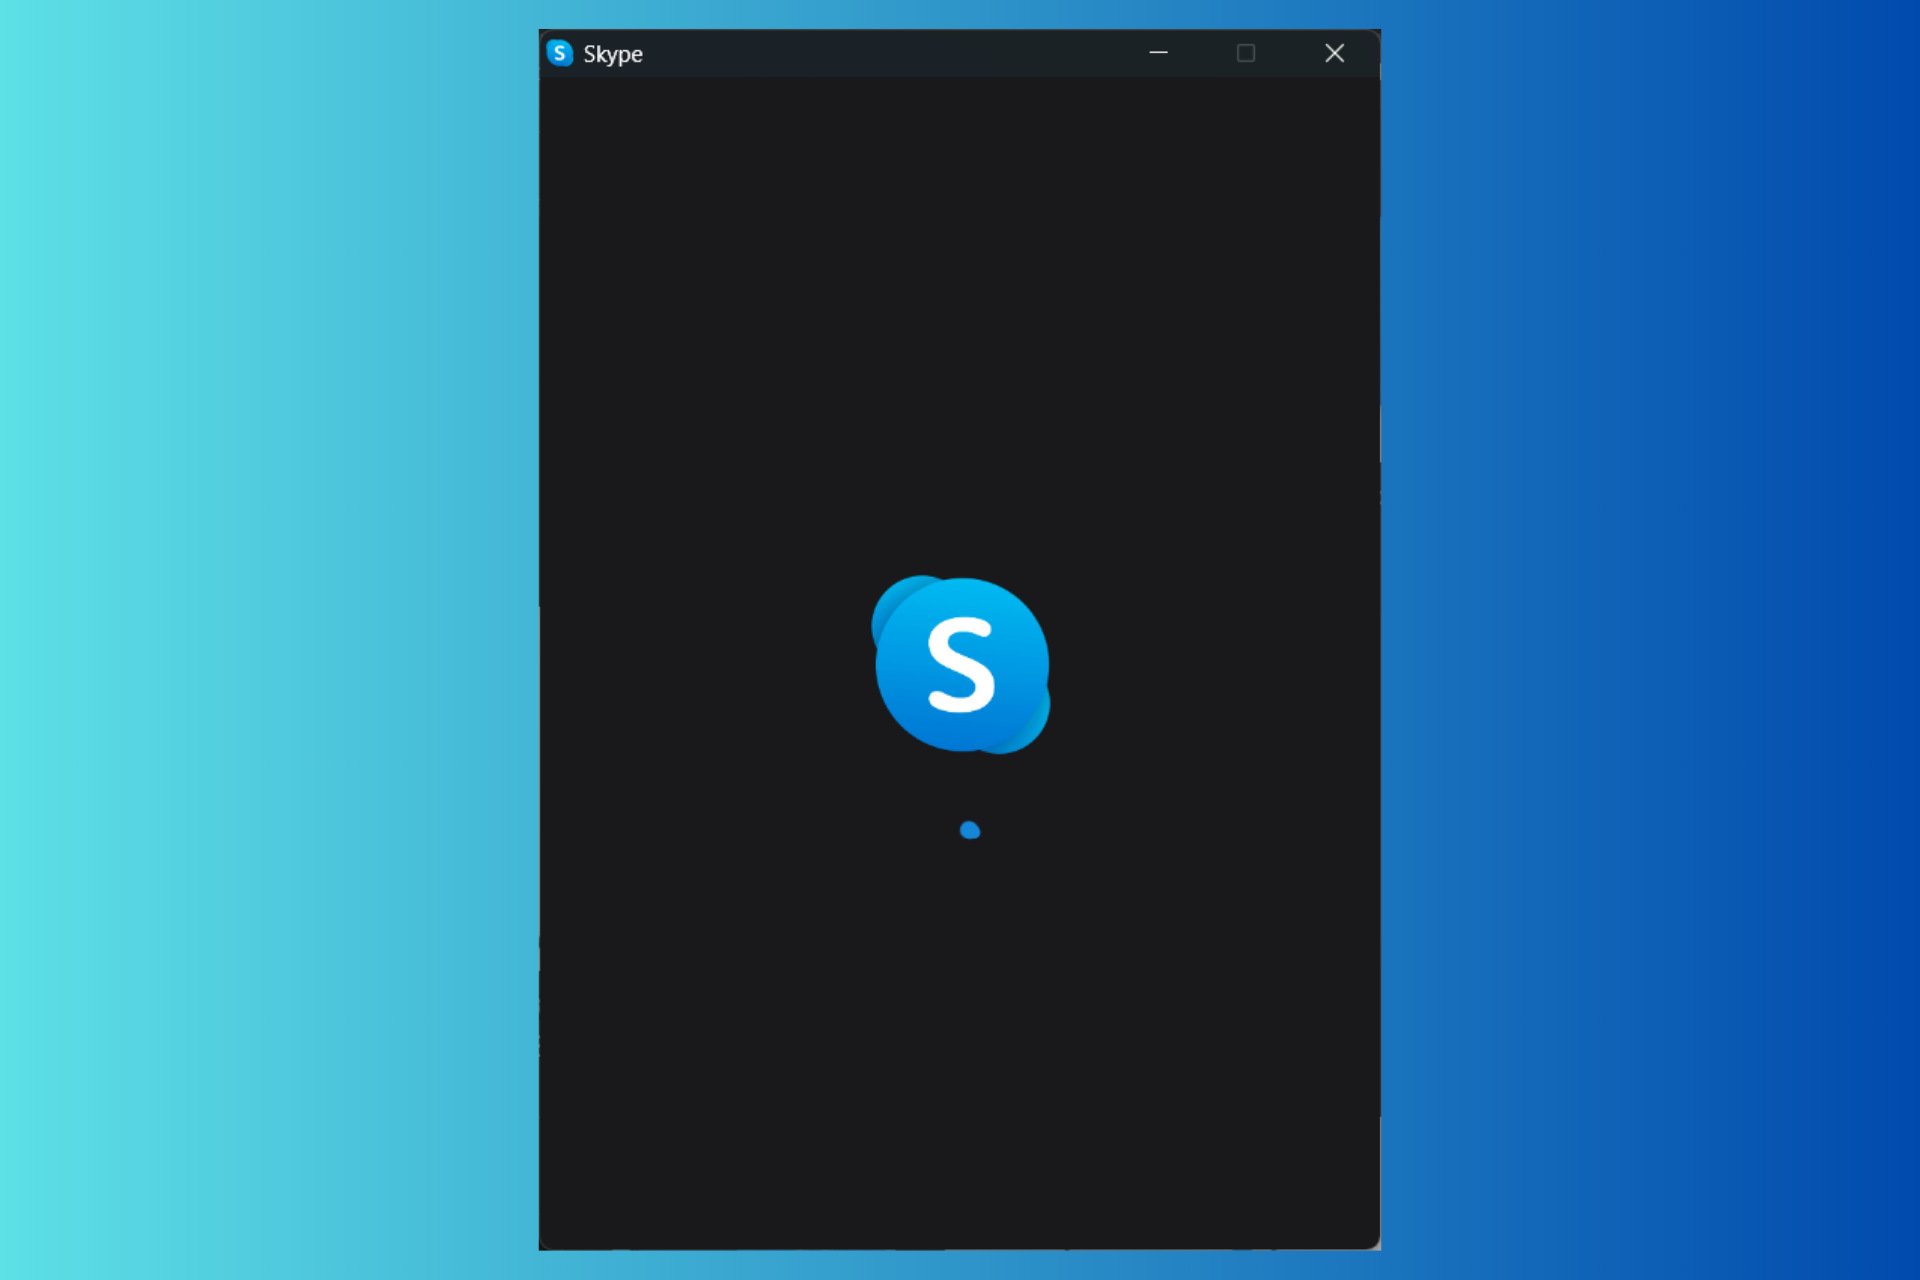 Users can't send photos in Skype